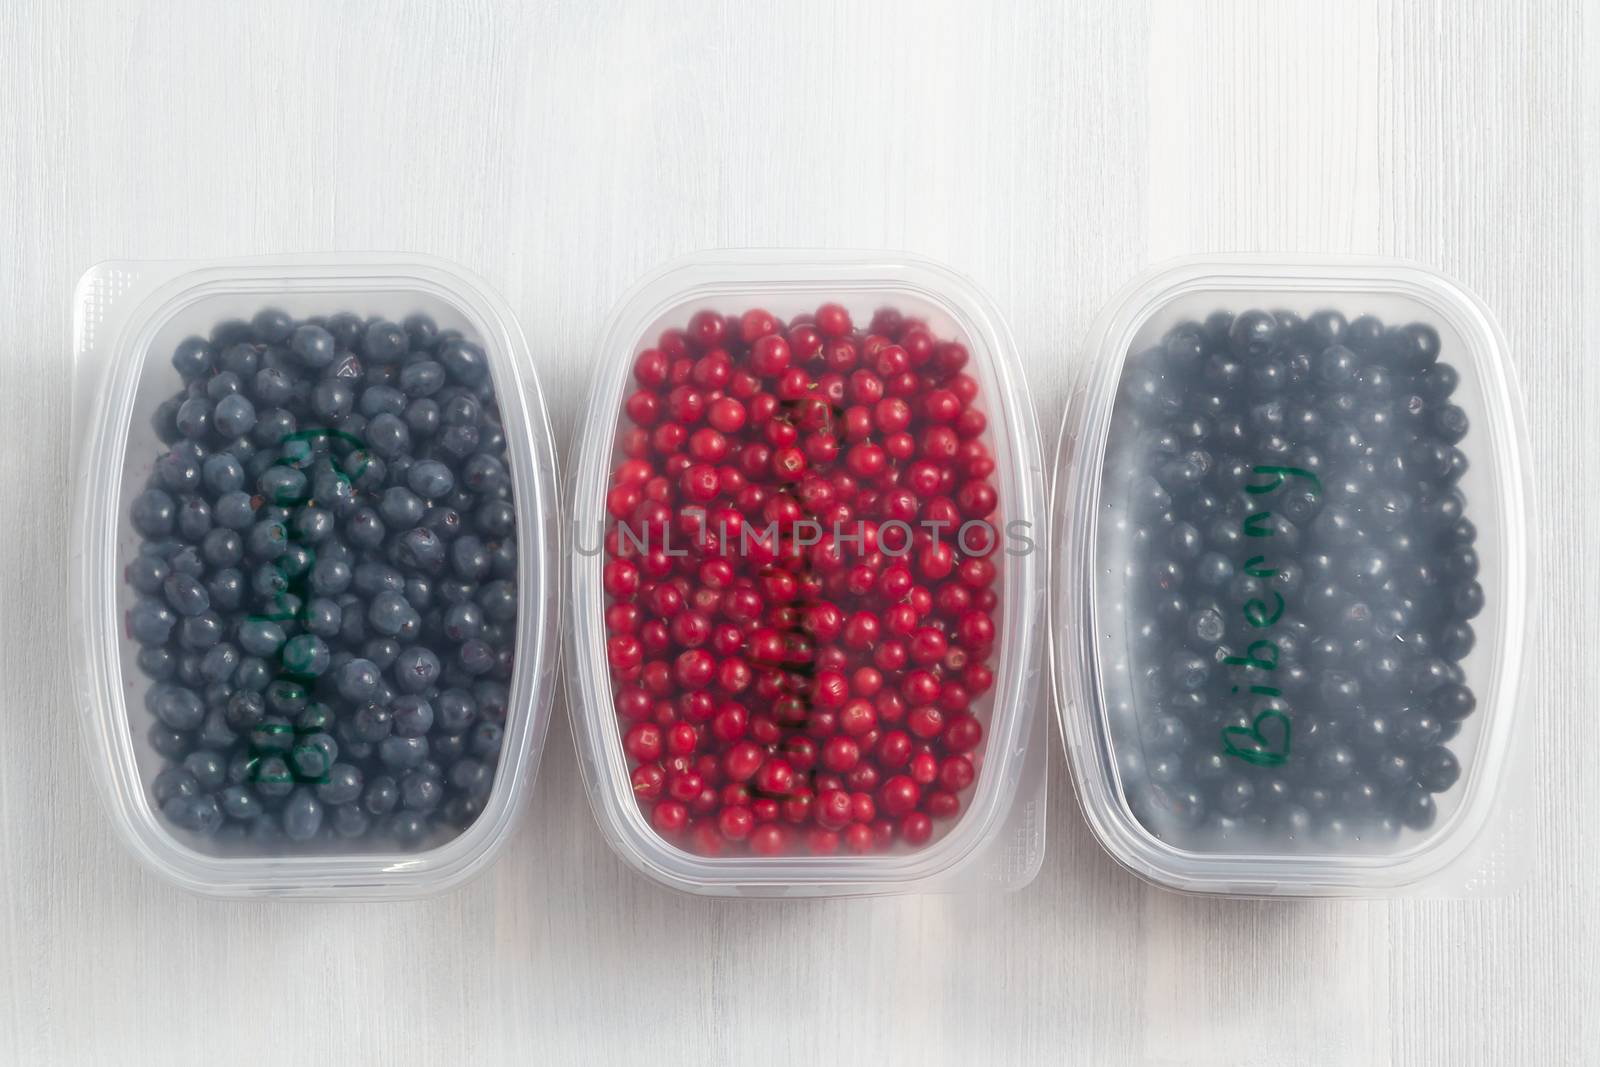 Berries laid out in containers and prepared for freezing and storage, top view.